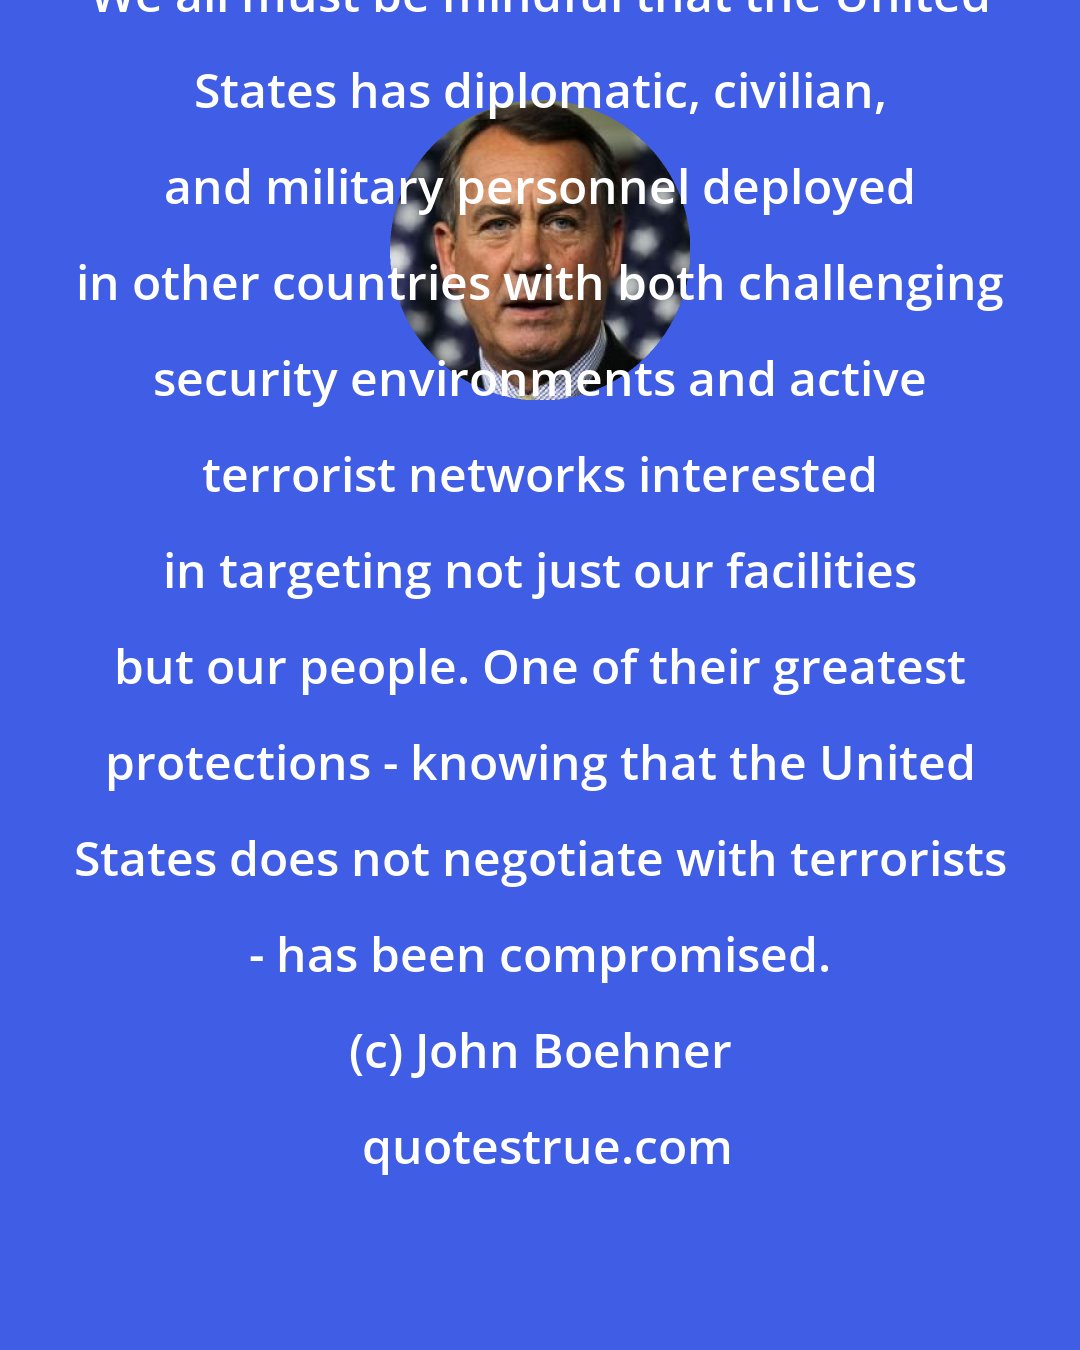 John Boehner: We all must be mindful that the United States has diplomatic, civilian, and military personnel deployed in other countries with both challenging security environments and active terrorist networks interested in targeting not just our facilities but our people. One of their greatest protections - knowing that the United States does not negotiate with terrorists - has been compromised.